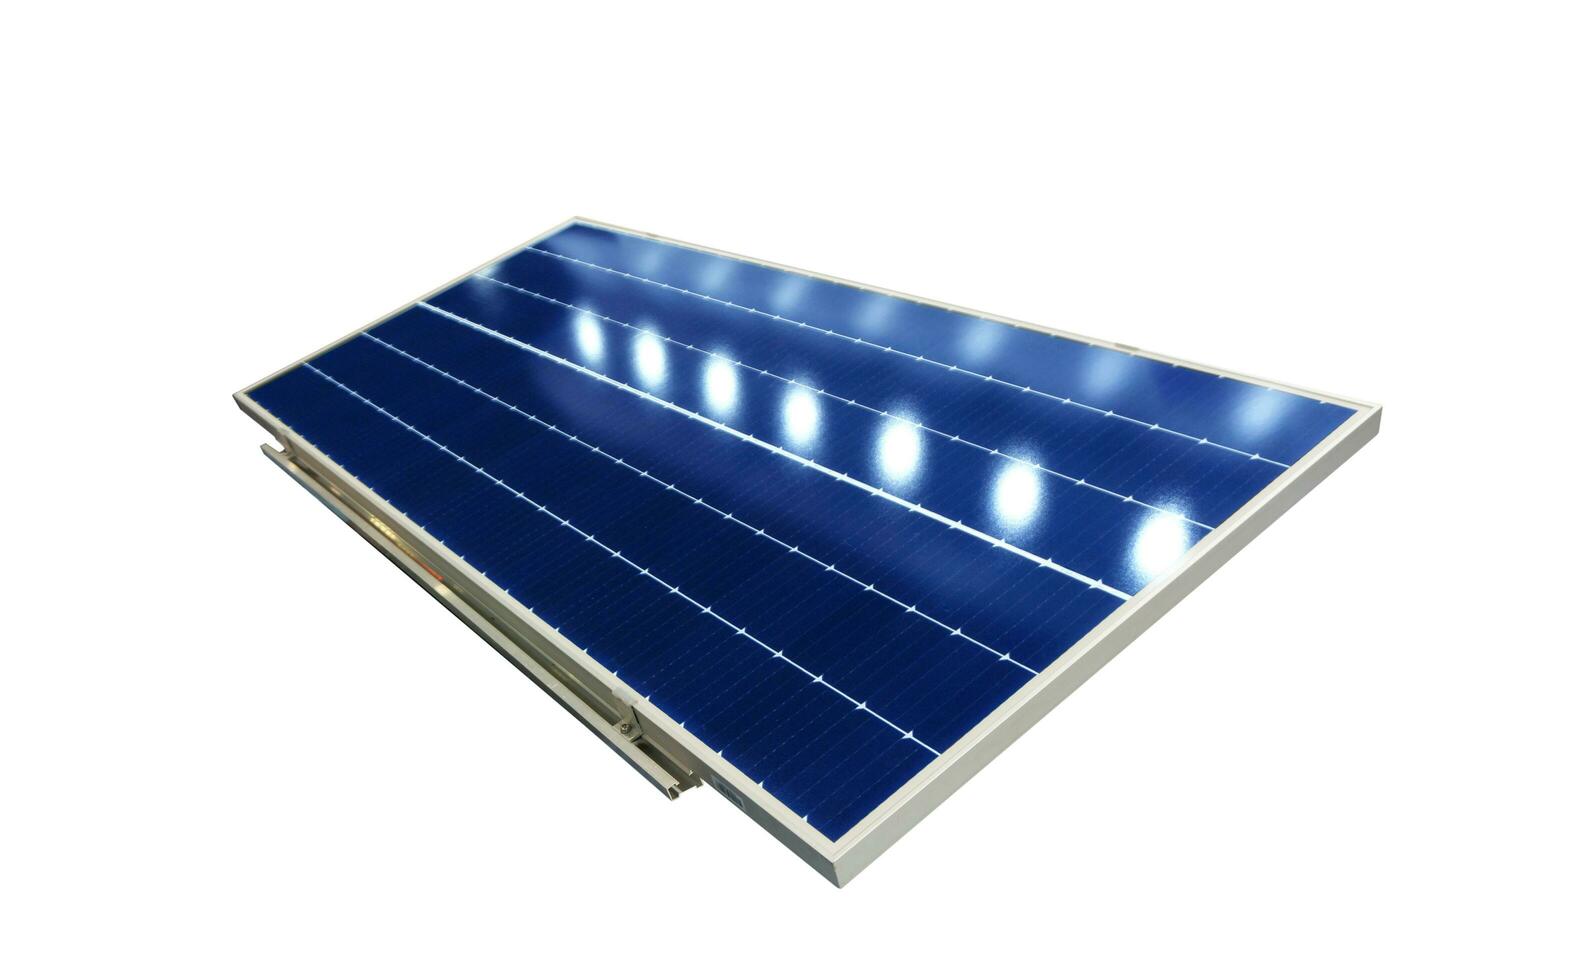 Solar panels absorb sunlight as a source of energy to generate direct current electricity. photo